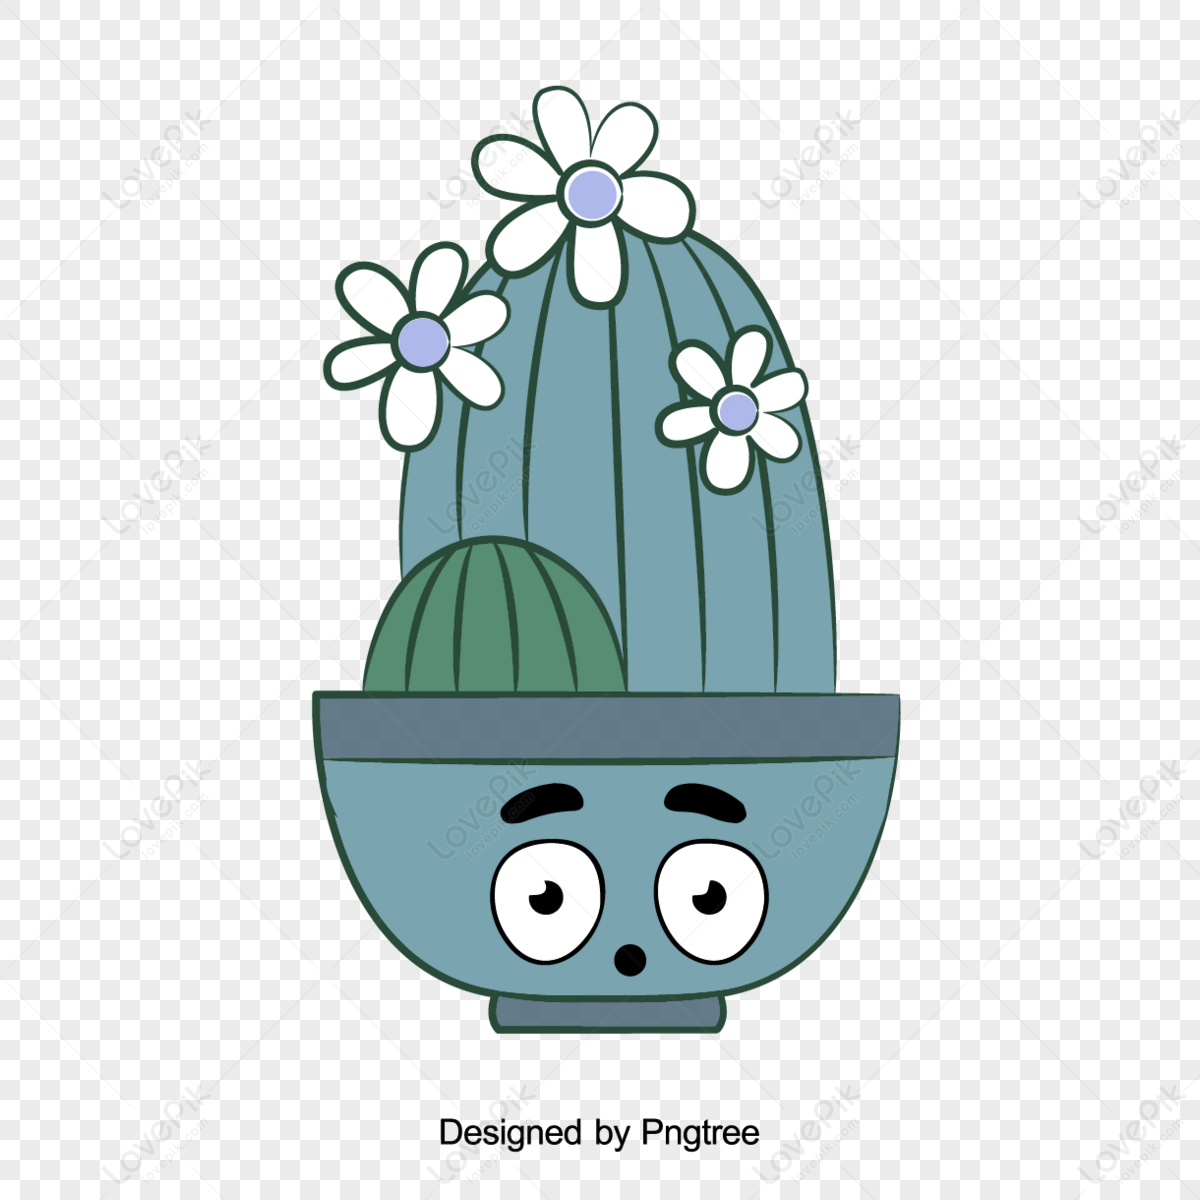 Plant Pot Drawing Vector Design Images, Ink Drawing Manga Style Potted  Plants Vector, Hand Drawn Cattle, Ink Painting, Comics PNG Image For Free  Download